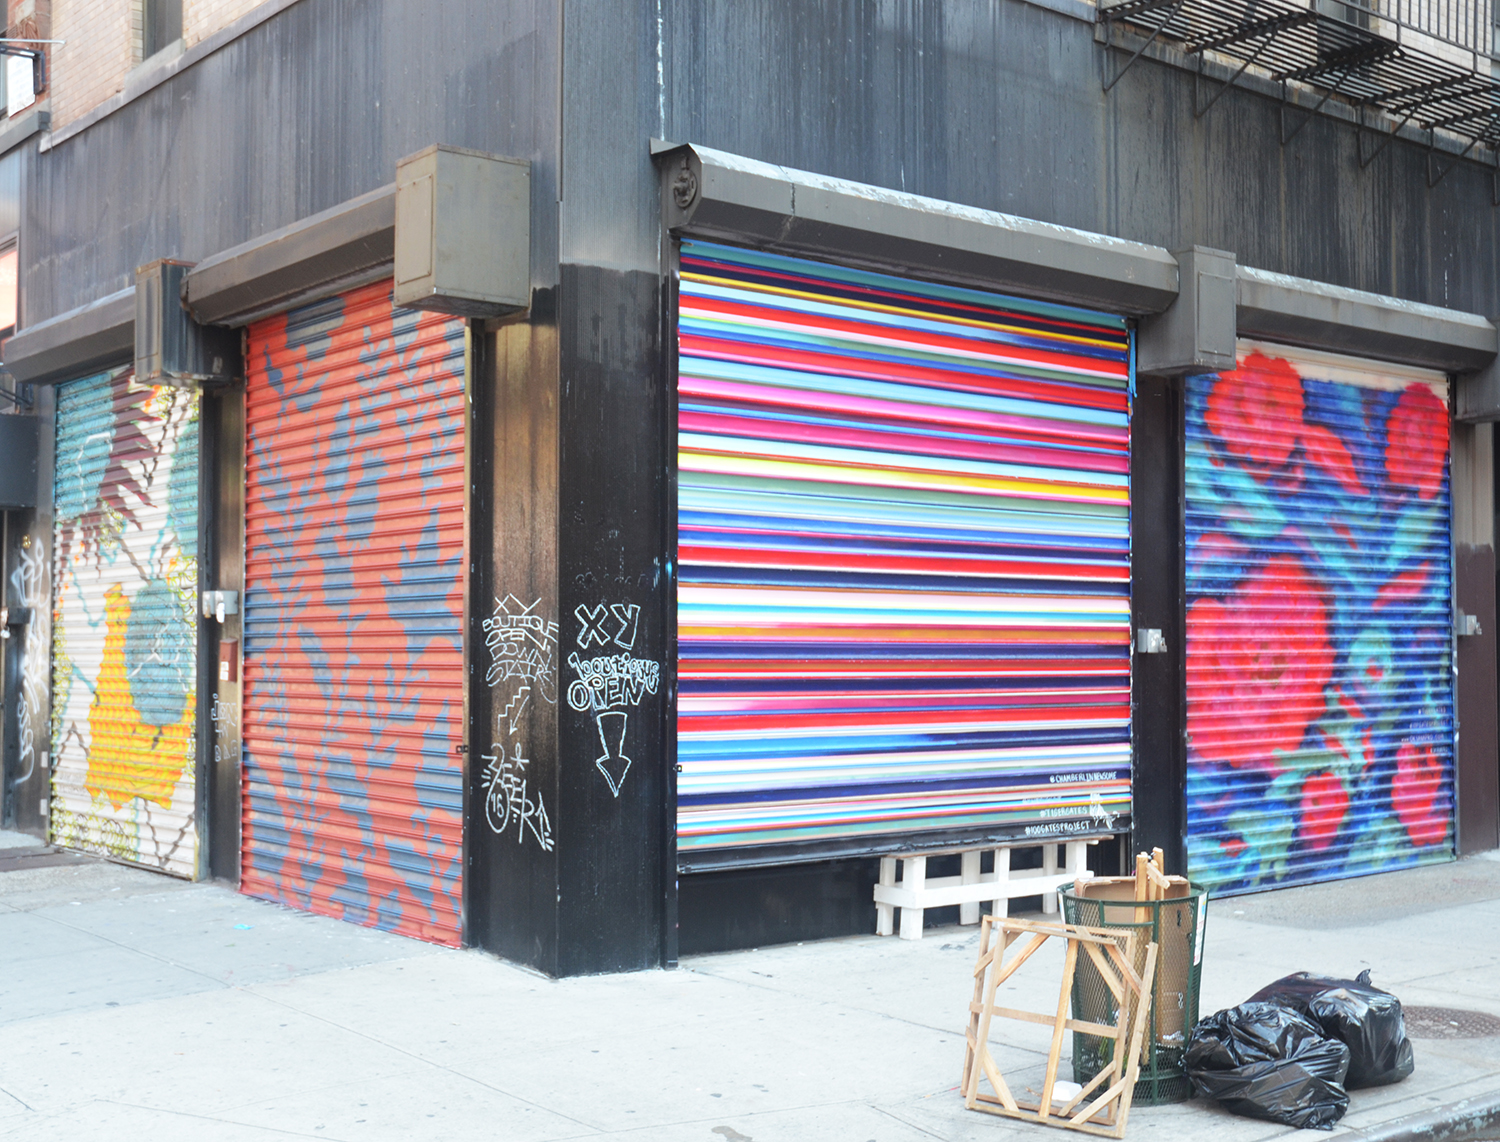 Examples of 100 Gates at 81 Hester Street. From left to right, artwork by Kim Carlino, Oksana Prokopenko (unfinished), Chamberlin Newsome, and Oksana Prokopenko. All photographs by the author